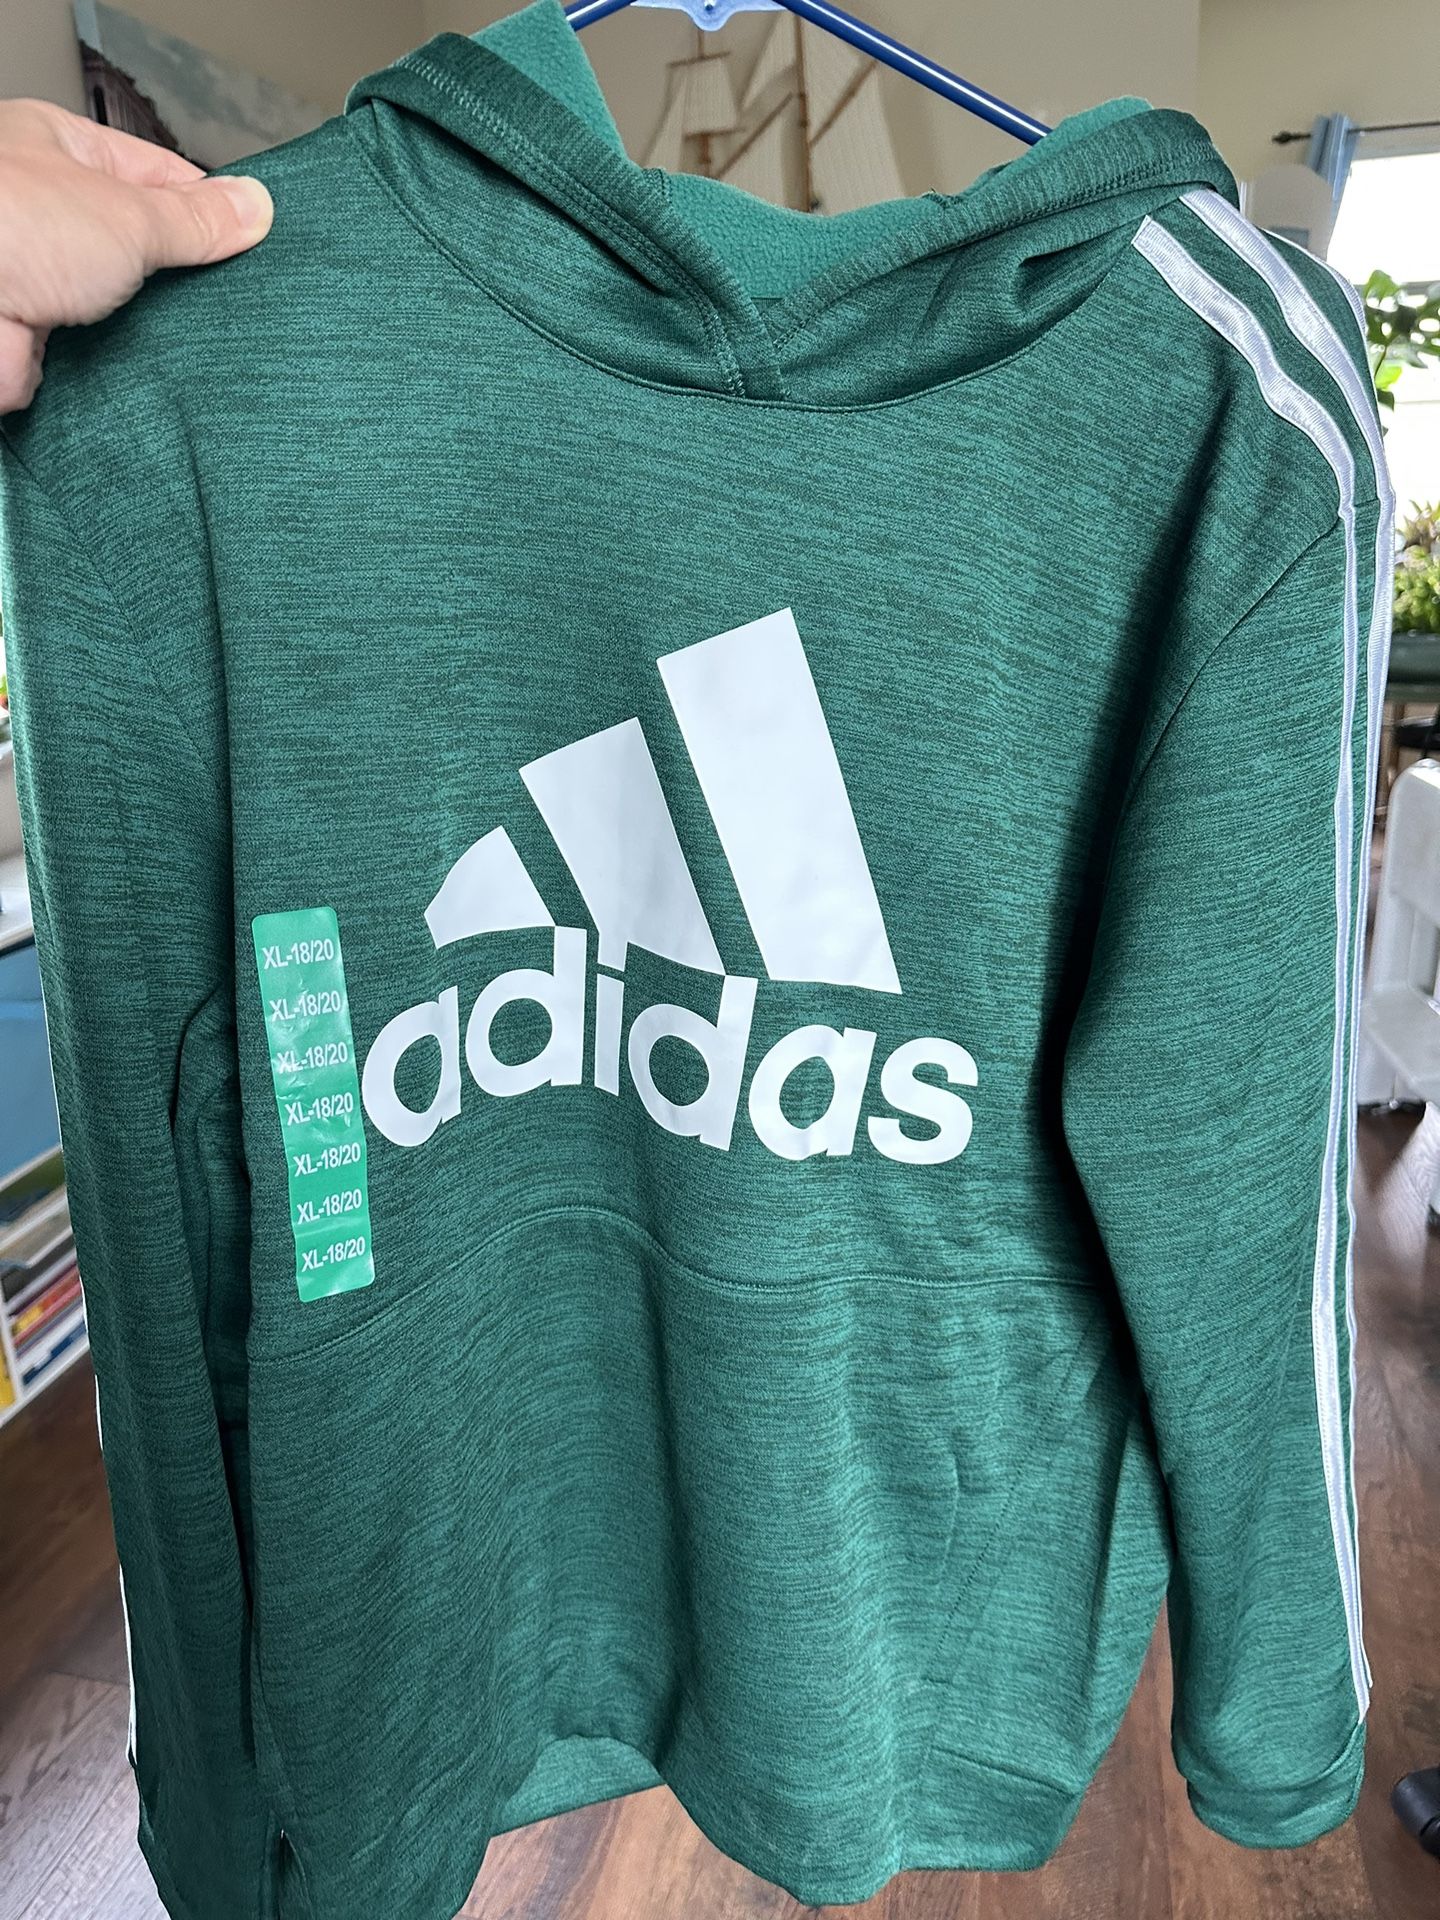 New Youth Adidas Hoodie Size XL(18/20)